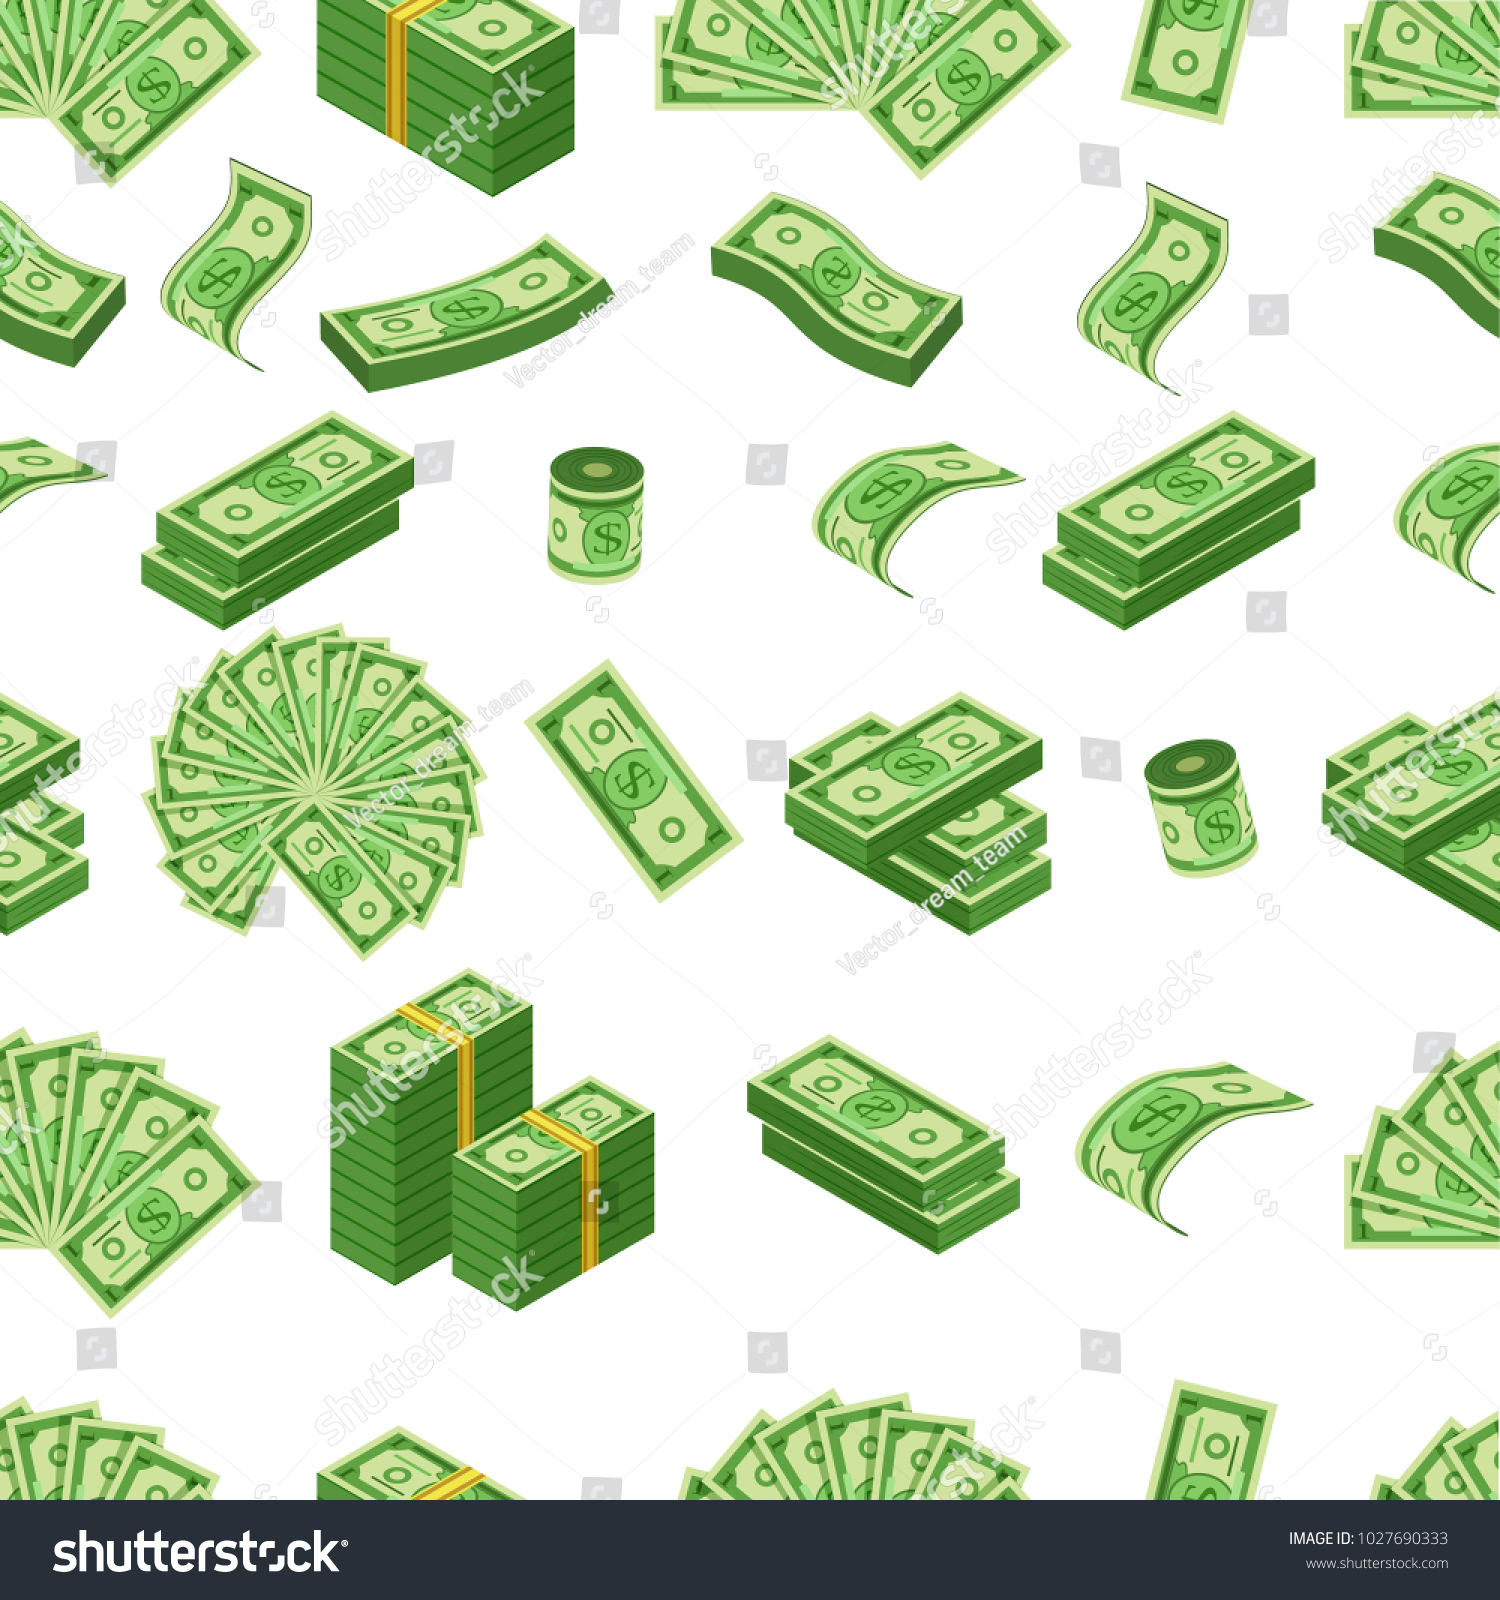 Money pattern with us dollar banknote, vector illustration #1027690333